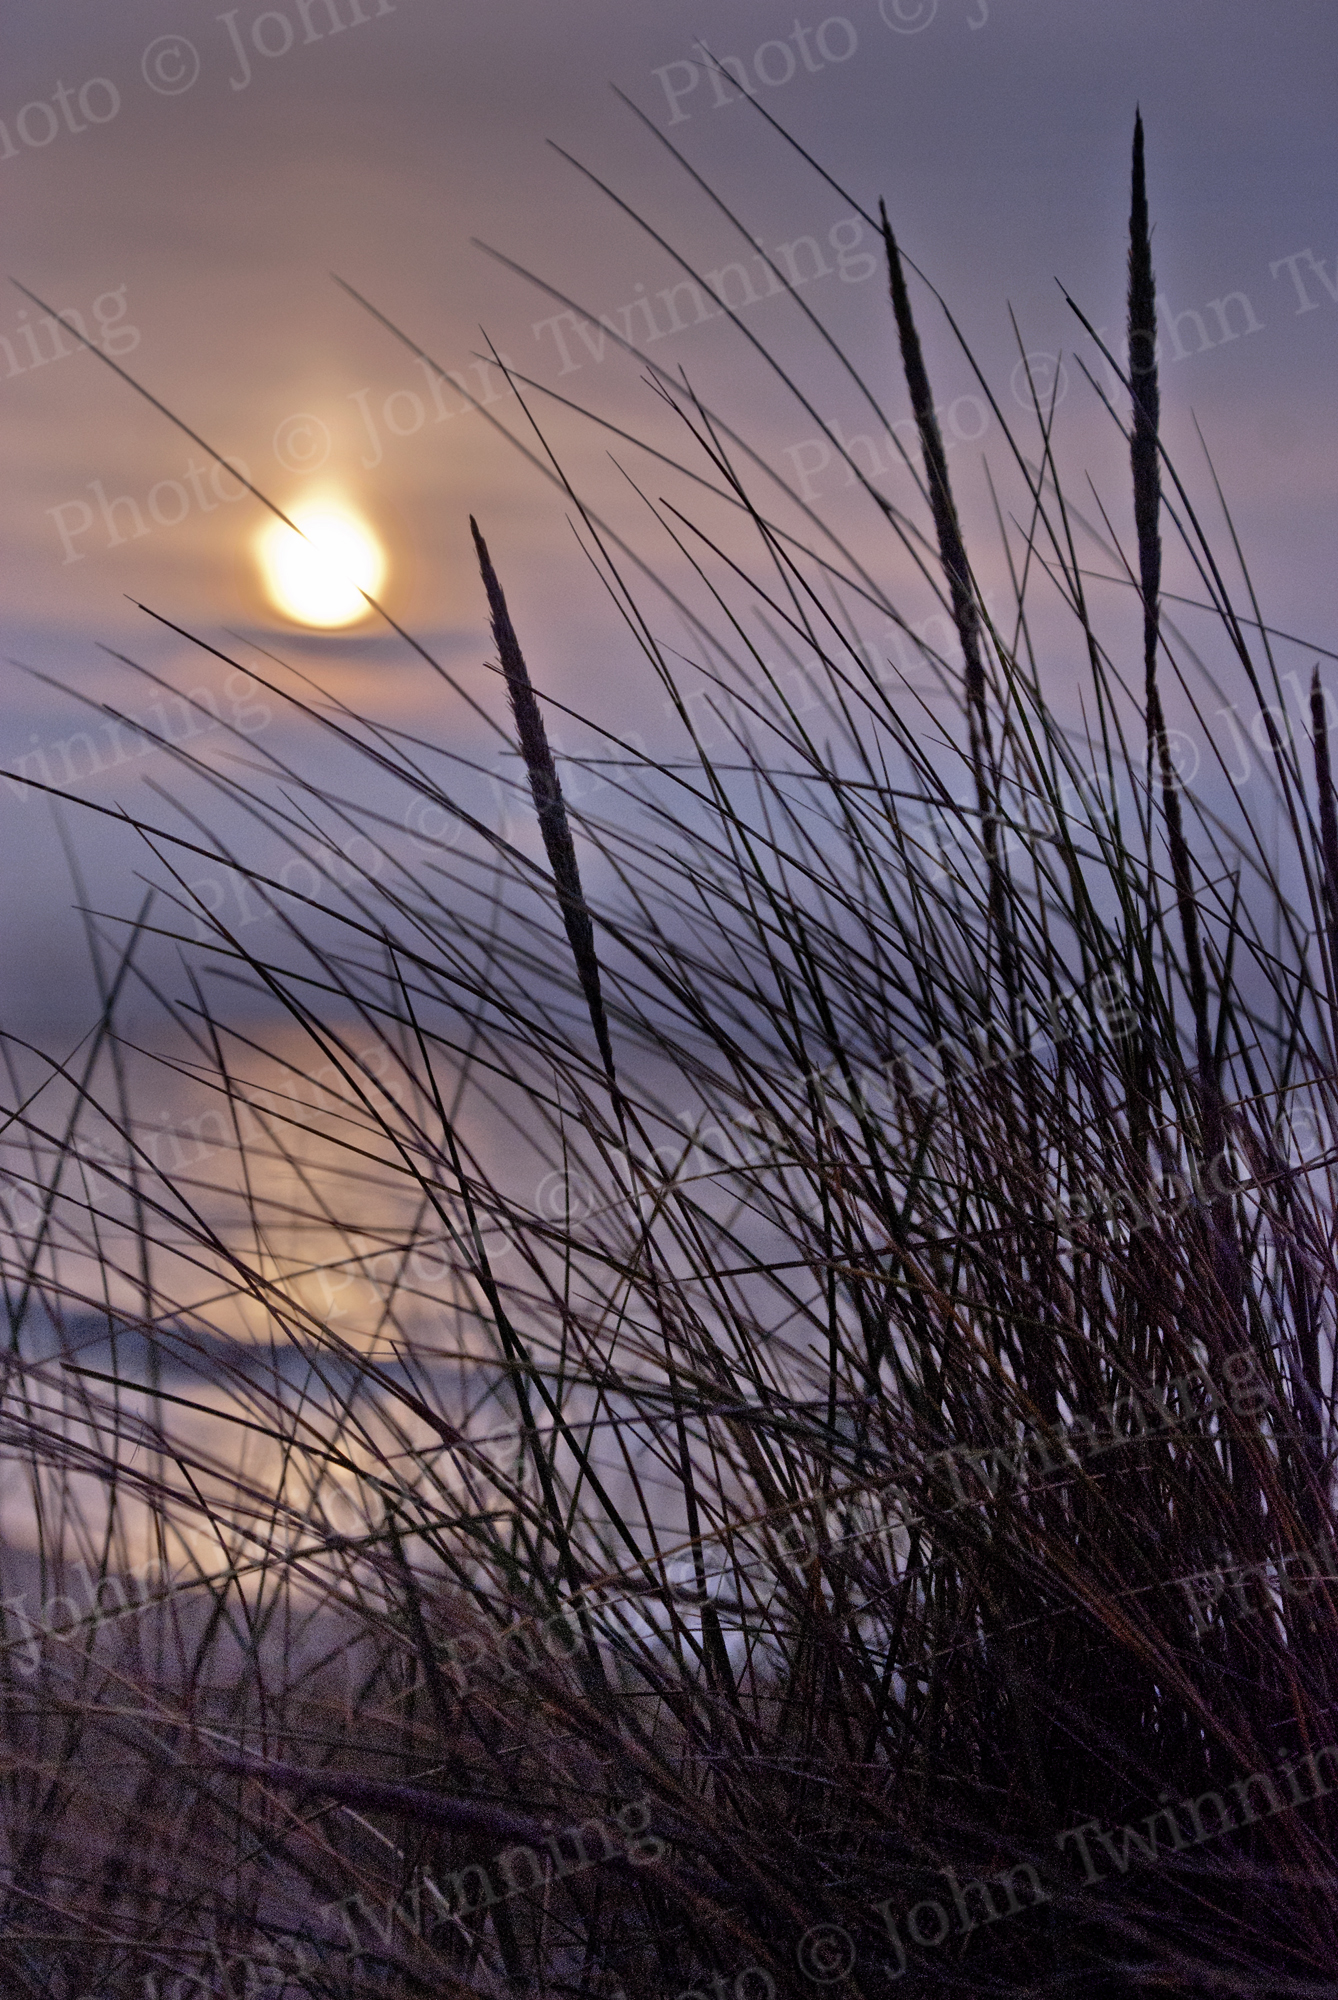 Private: ‘Dusk Breeze’ [photo] – art print from a photograph of dune grasses at sunset